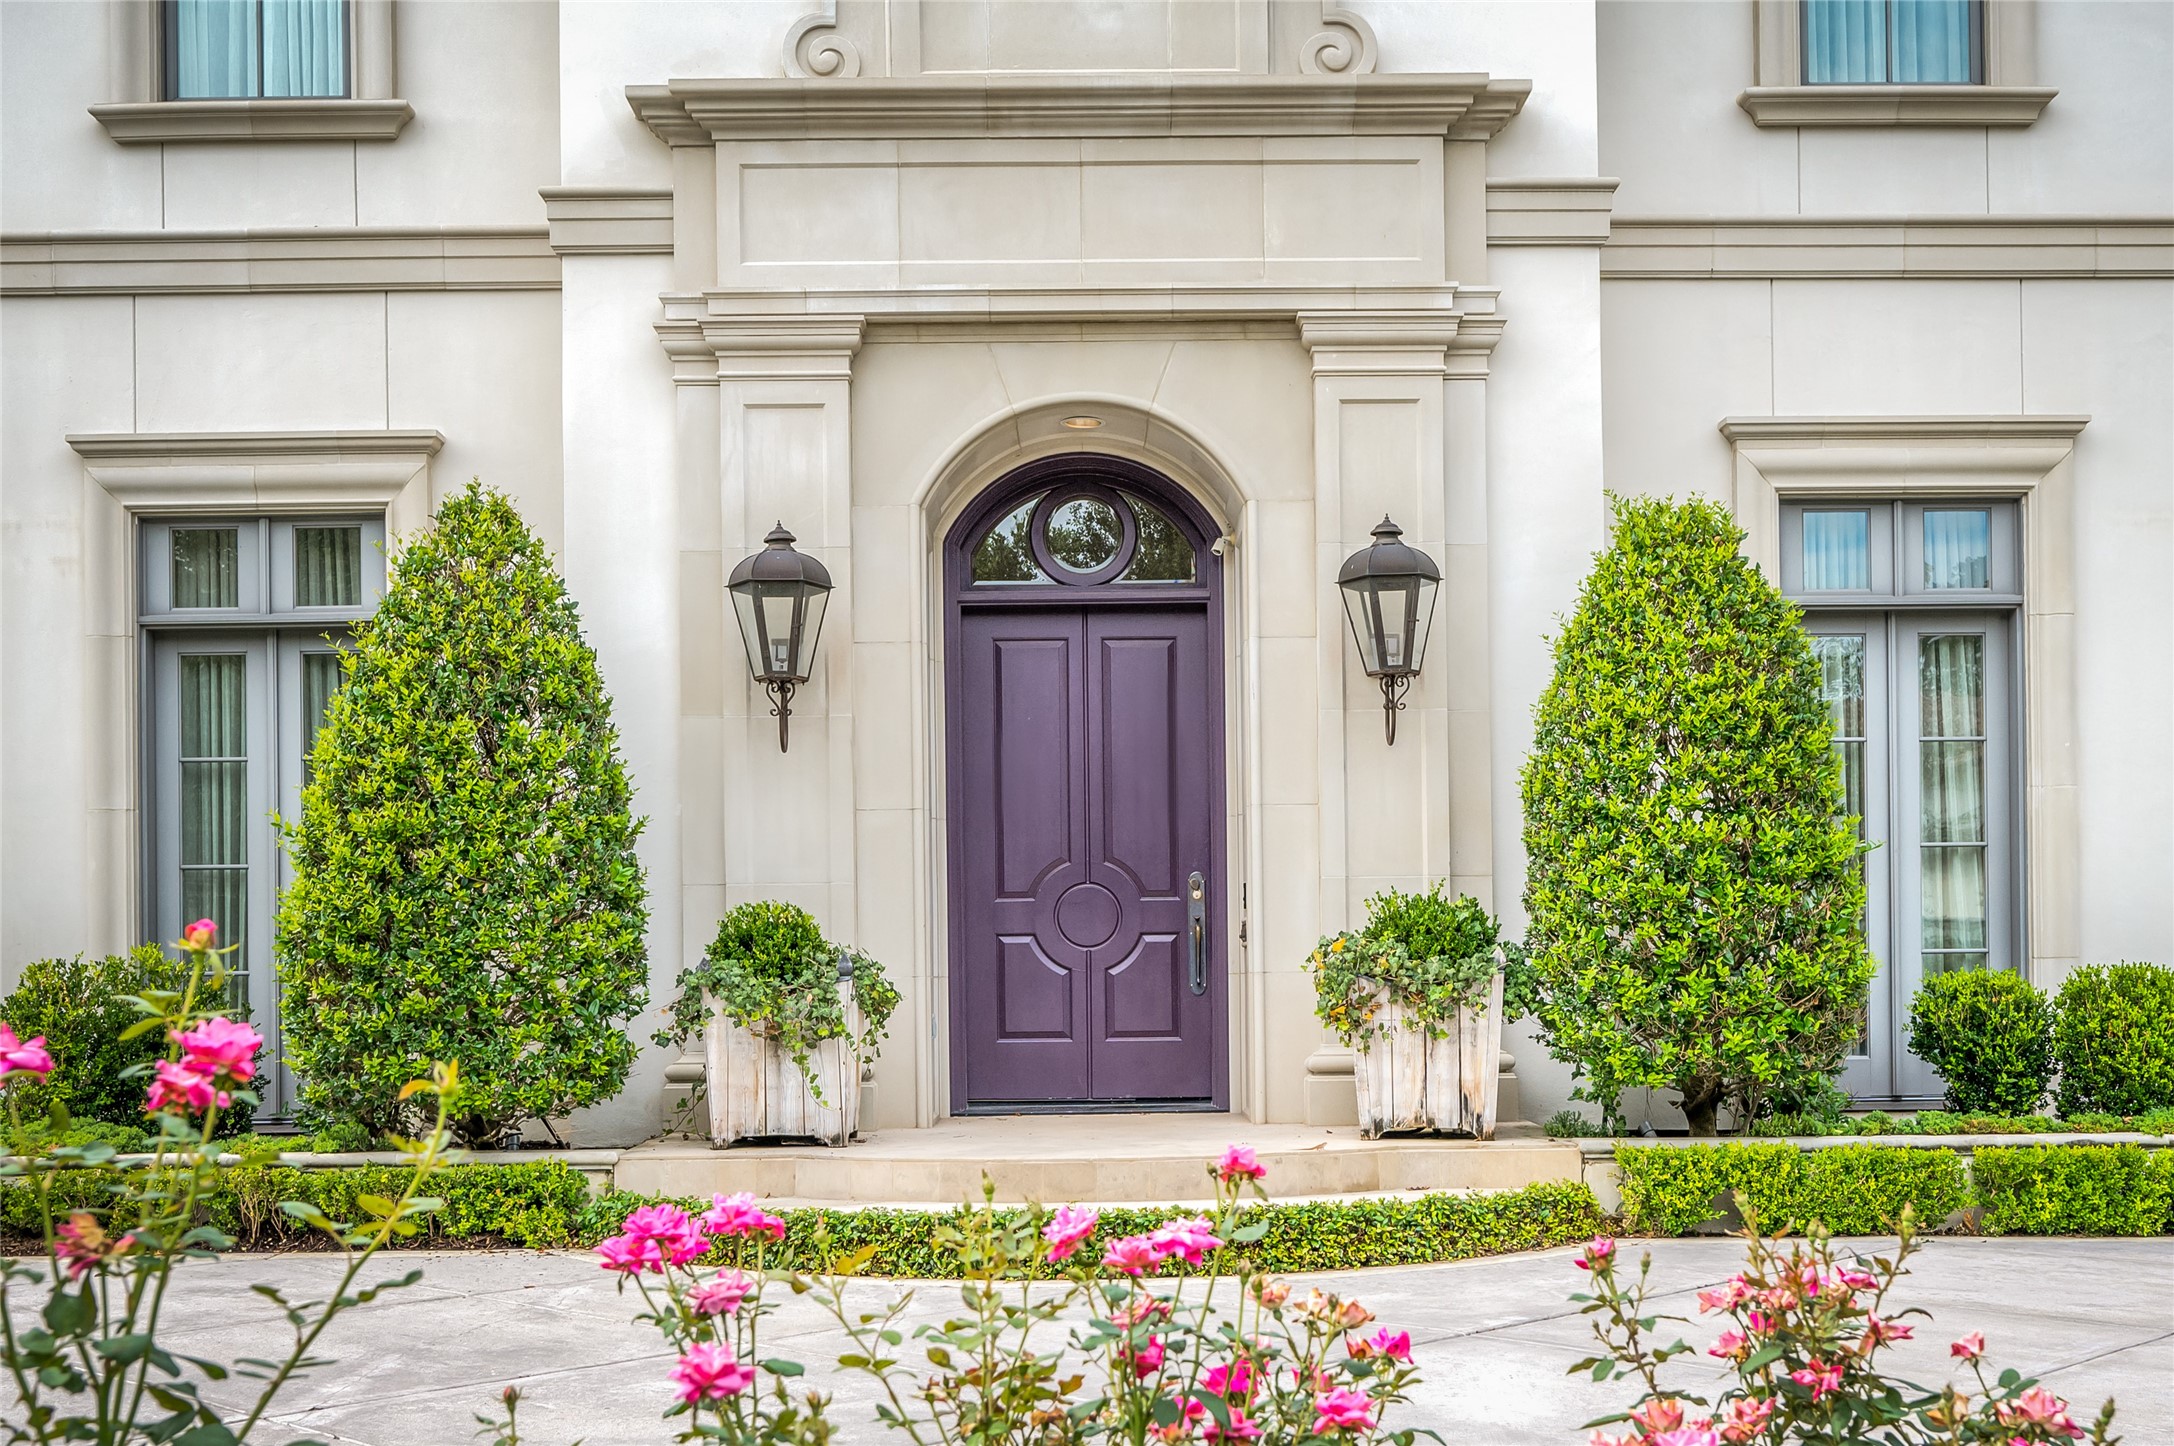 [Front Door]
The paneled front door has a highly custom transom.